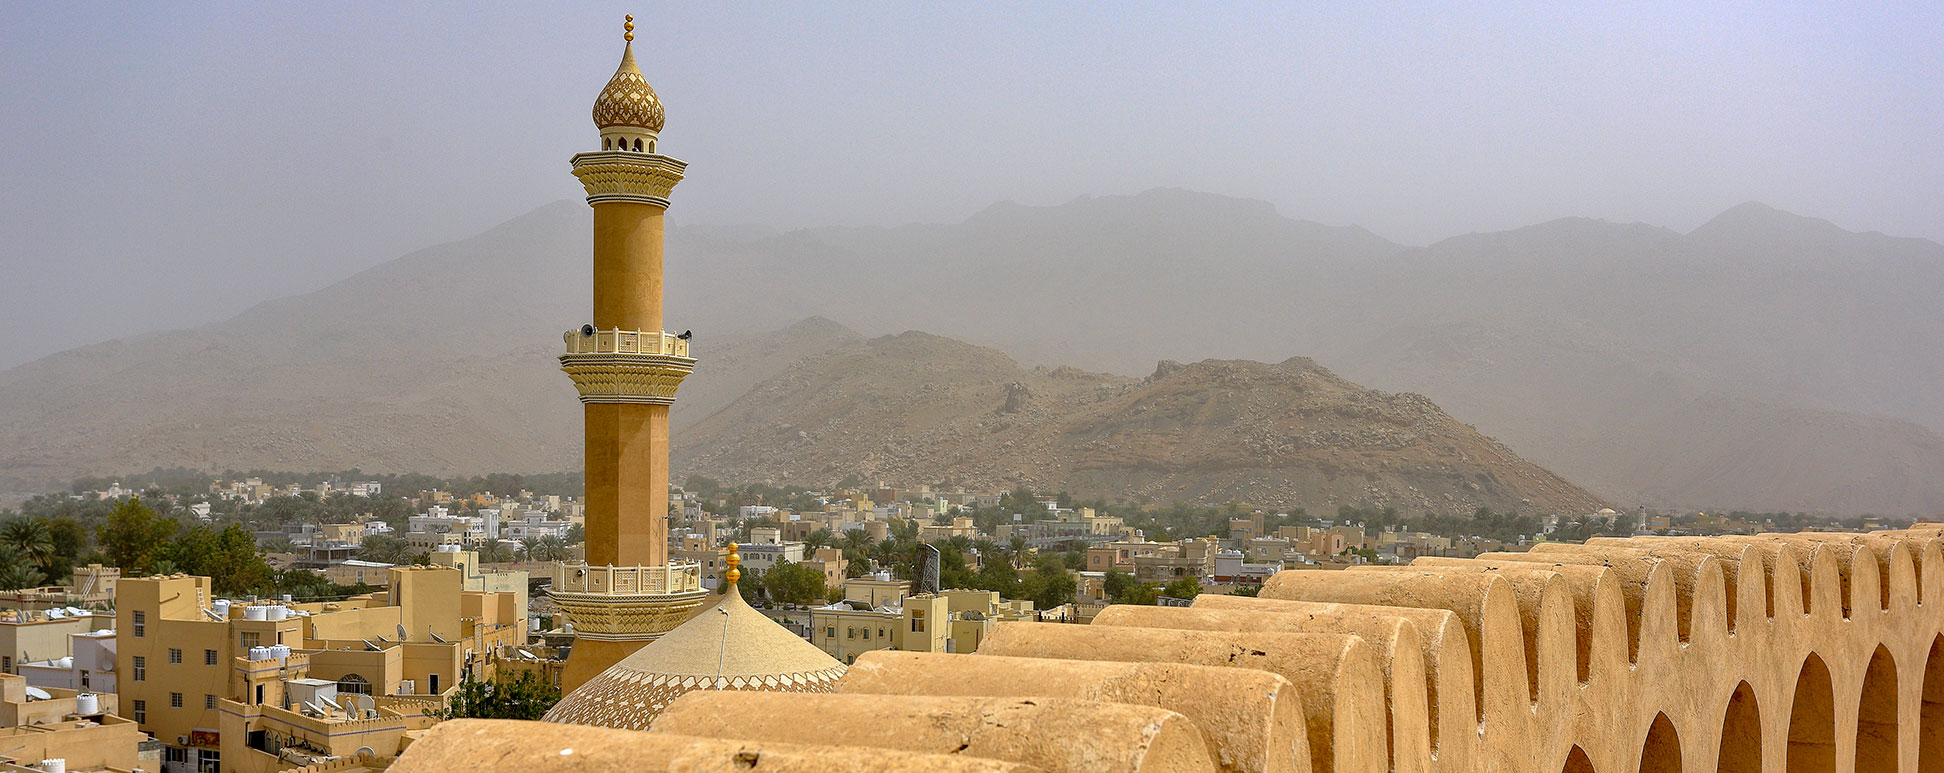 Minaret of the Friday Mosque, and part of Nizwa Fort in Nizwa, Oman